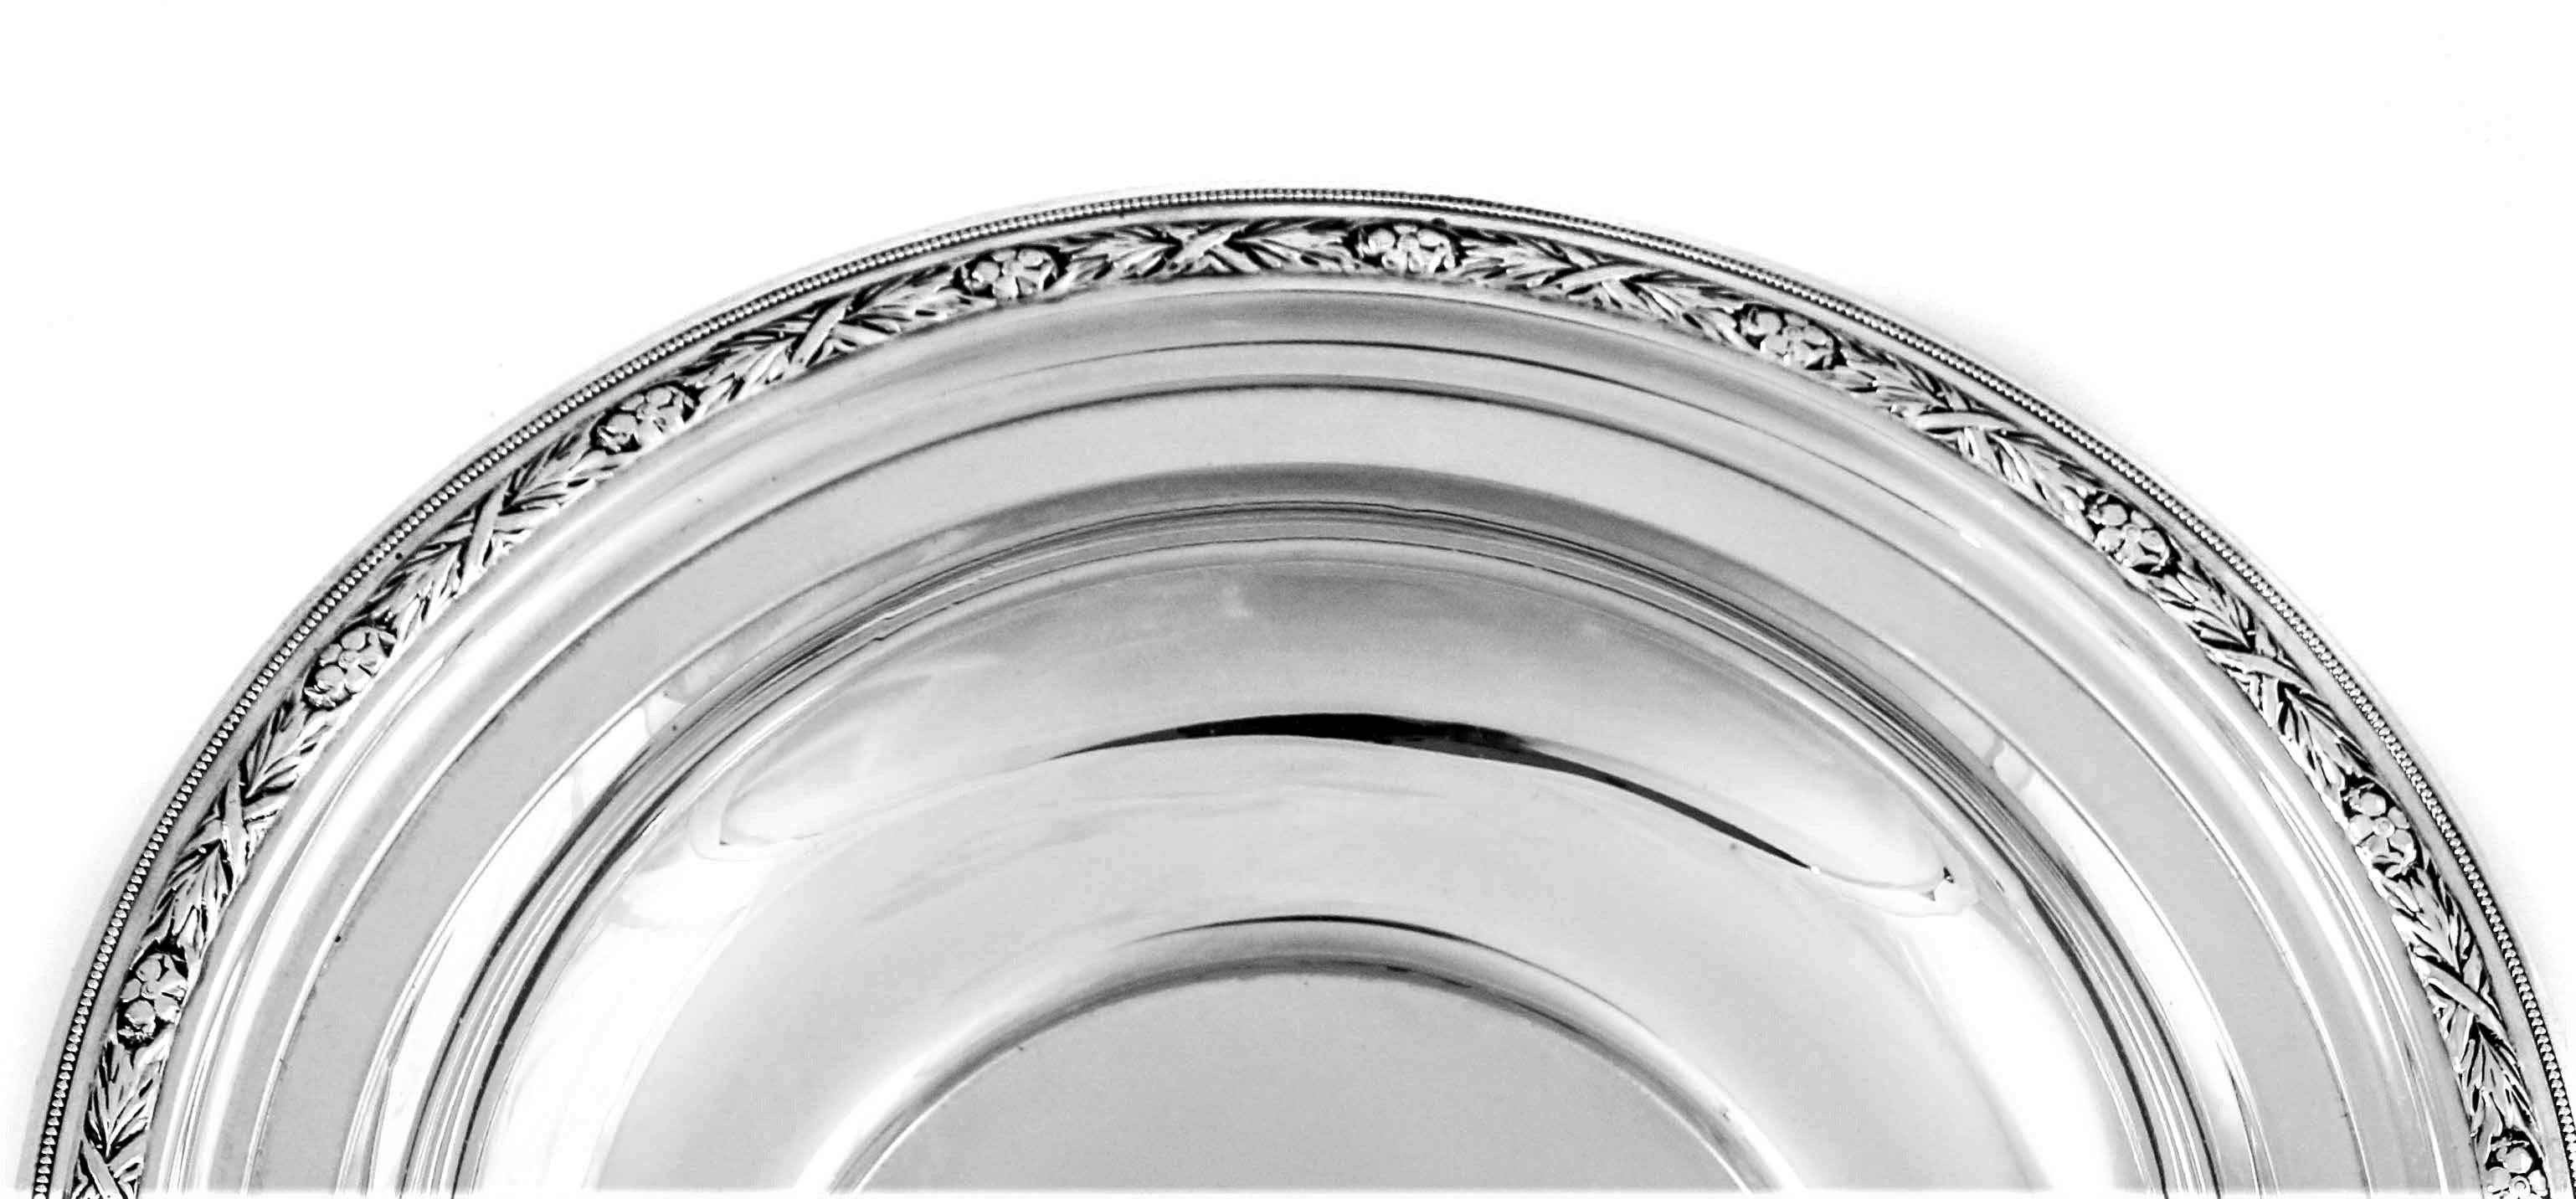 This sterling bowl is great for appetizers, side-dishes or even fruit, it’s a nice practical size. A simple decorative pattern of wreaths intersected by flowers runs the entire border.